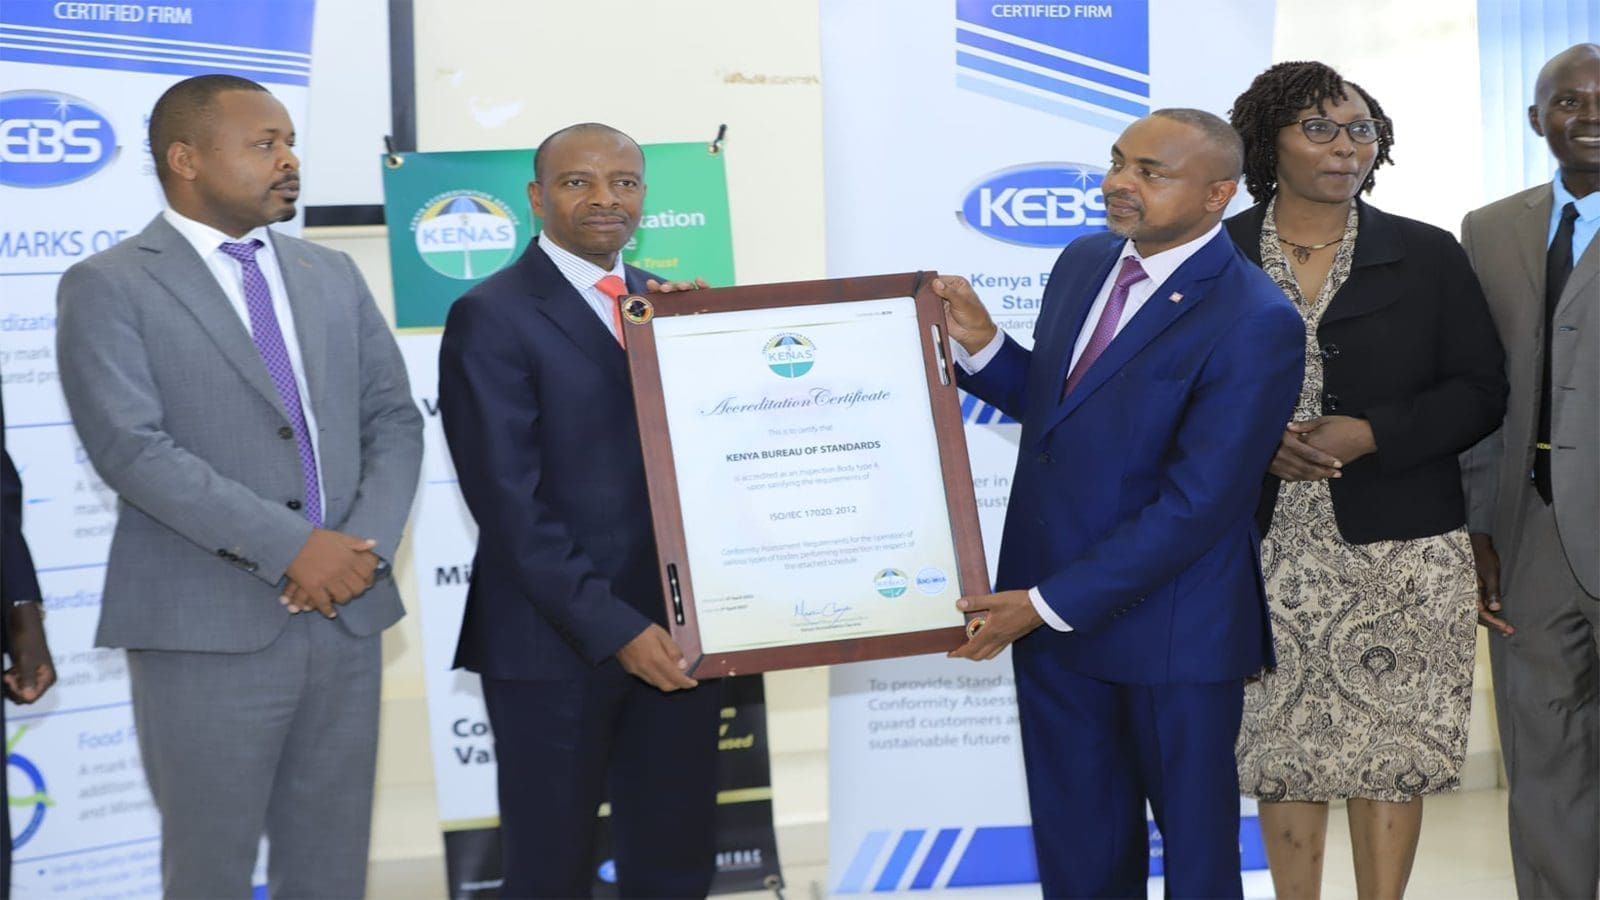 KEBS receives ISO/IEC 17020:2012 accreditation